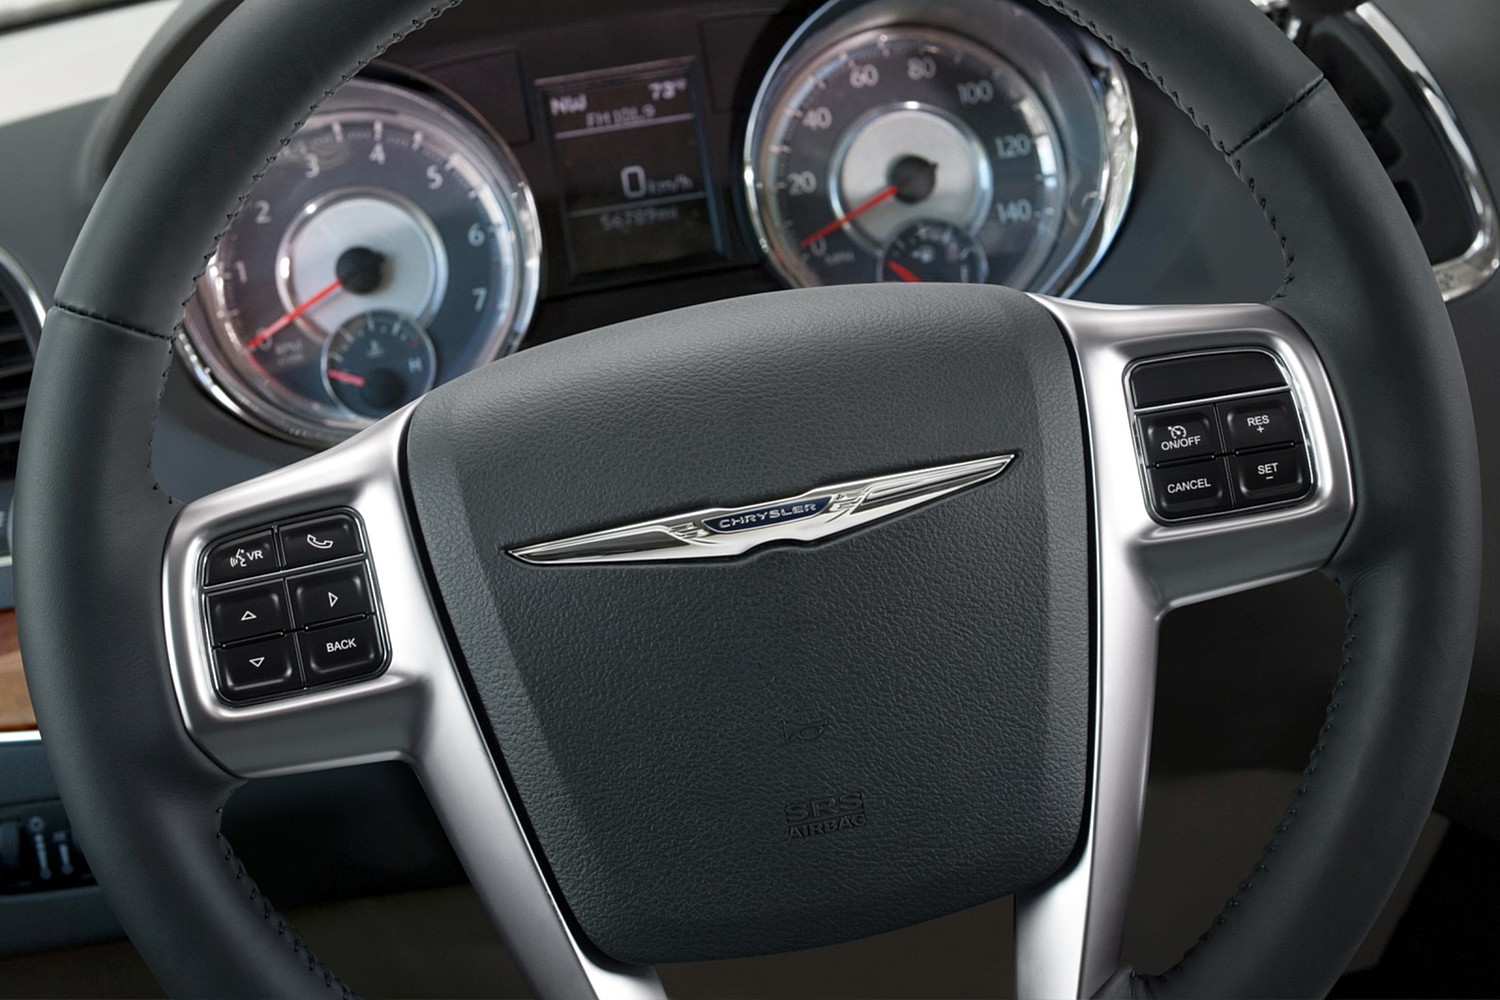 Chrysler Town and Country Limited Passenger Minivan Steering Wheel Detail (2013 model year shown)